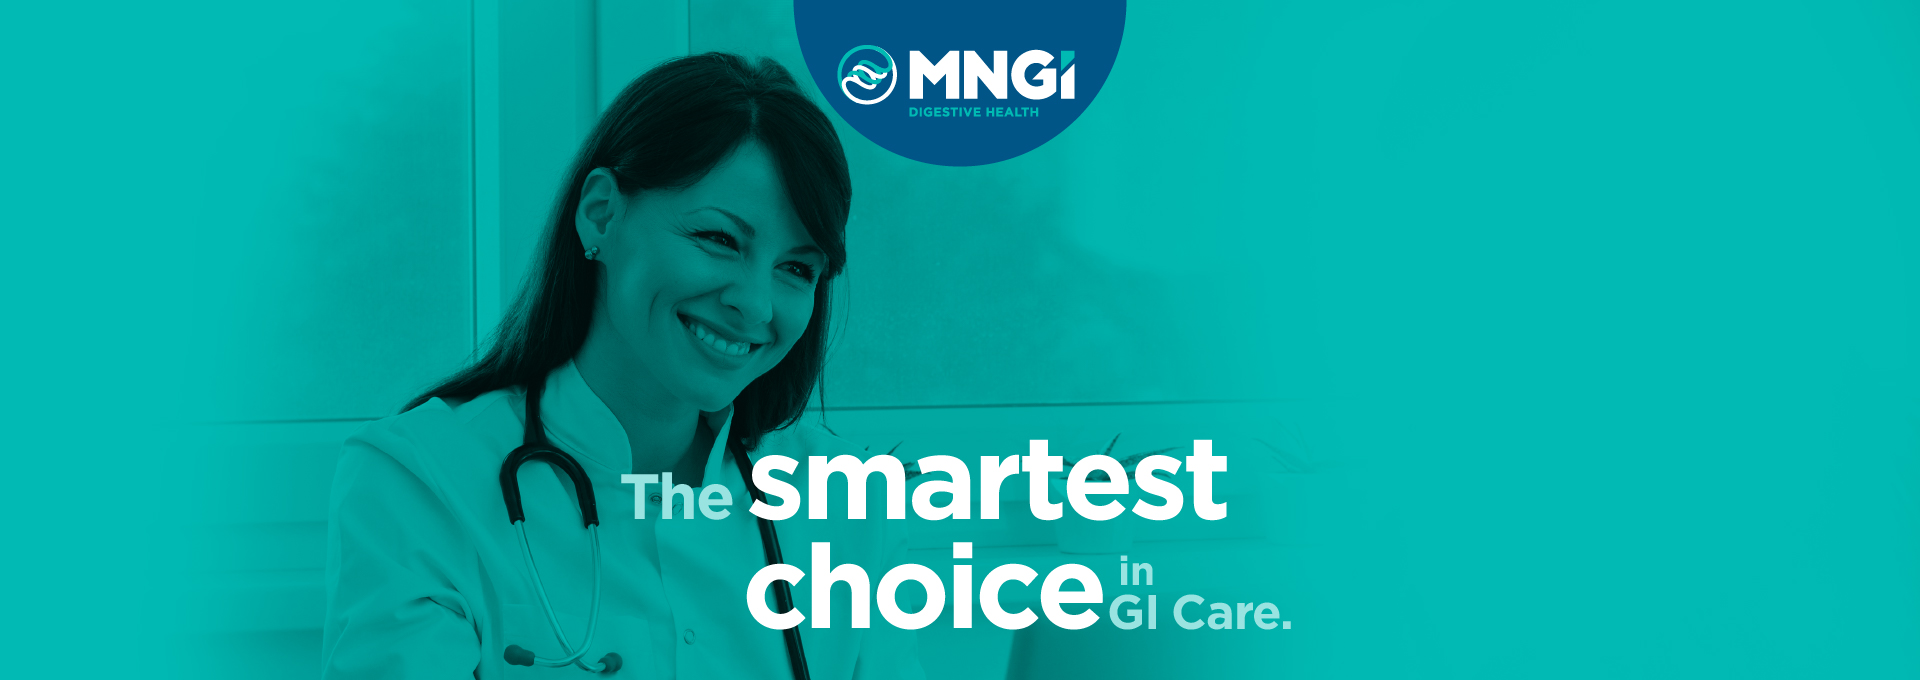 The Smartest Choice in GI Care